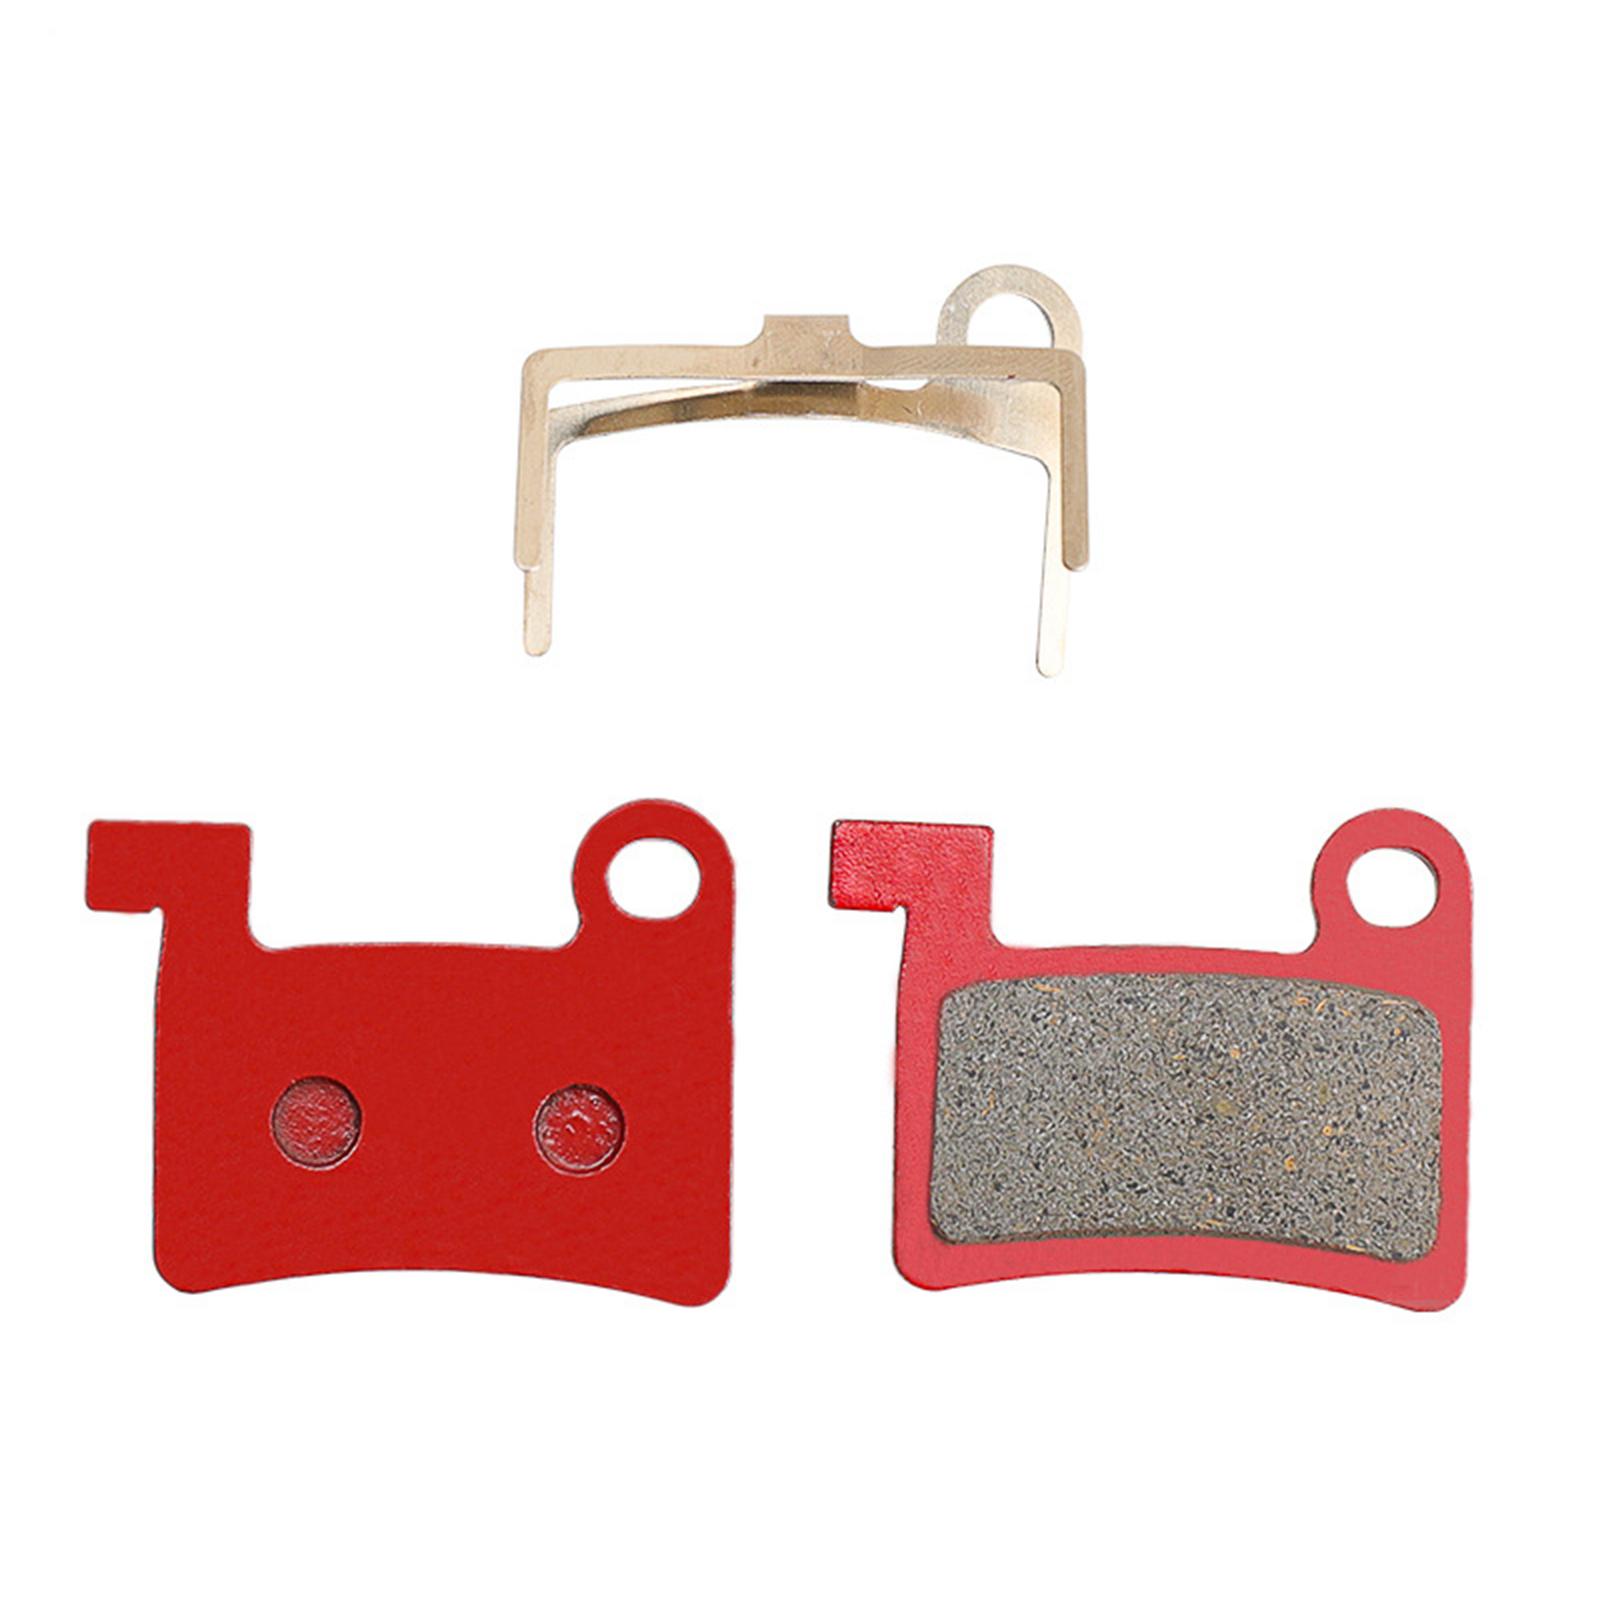 2x Bike Brake Pads Wear Resistant for MTB Bicycle Replacement Accessories